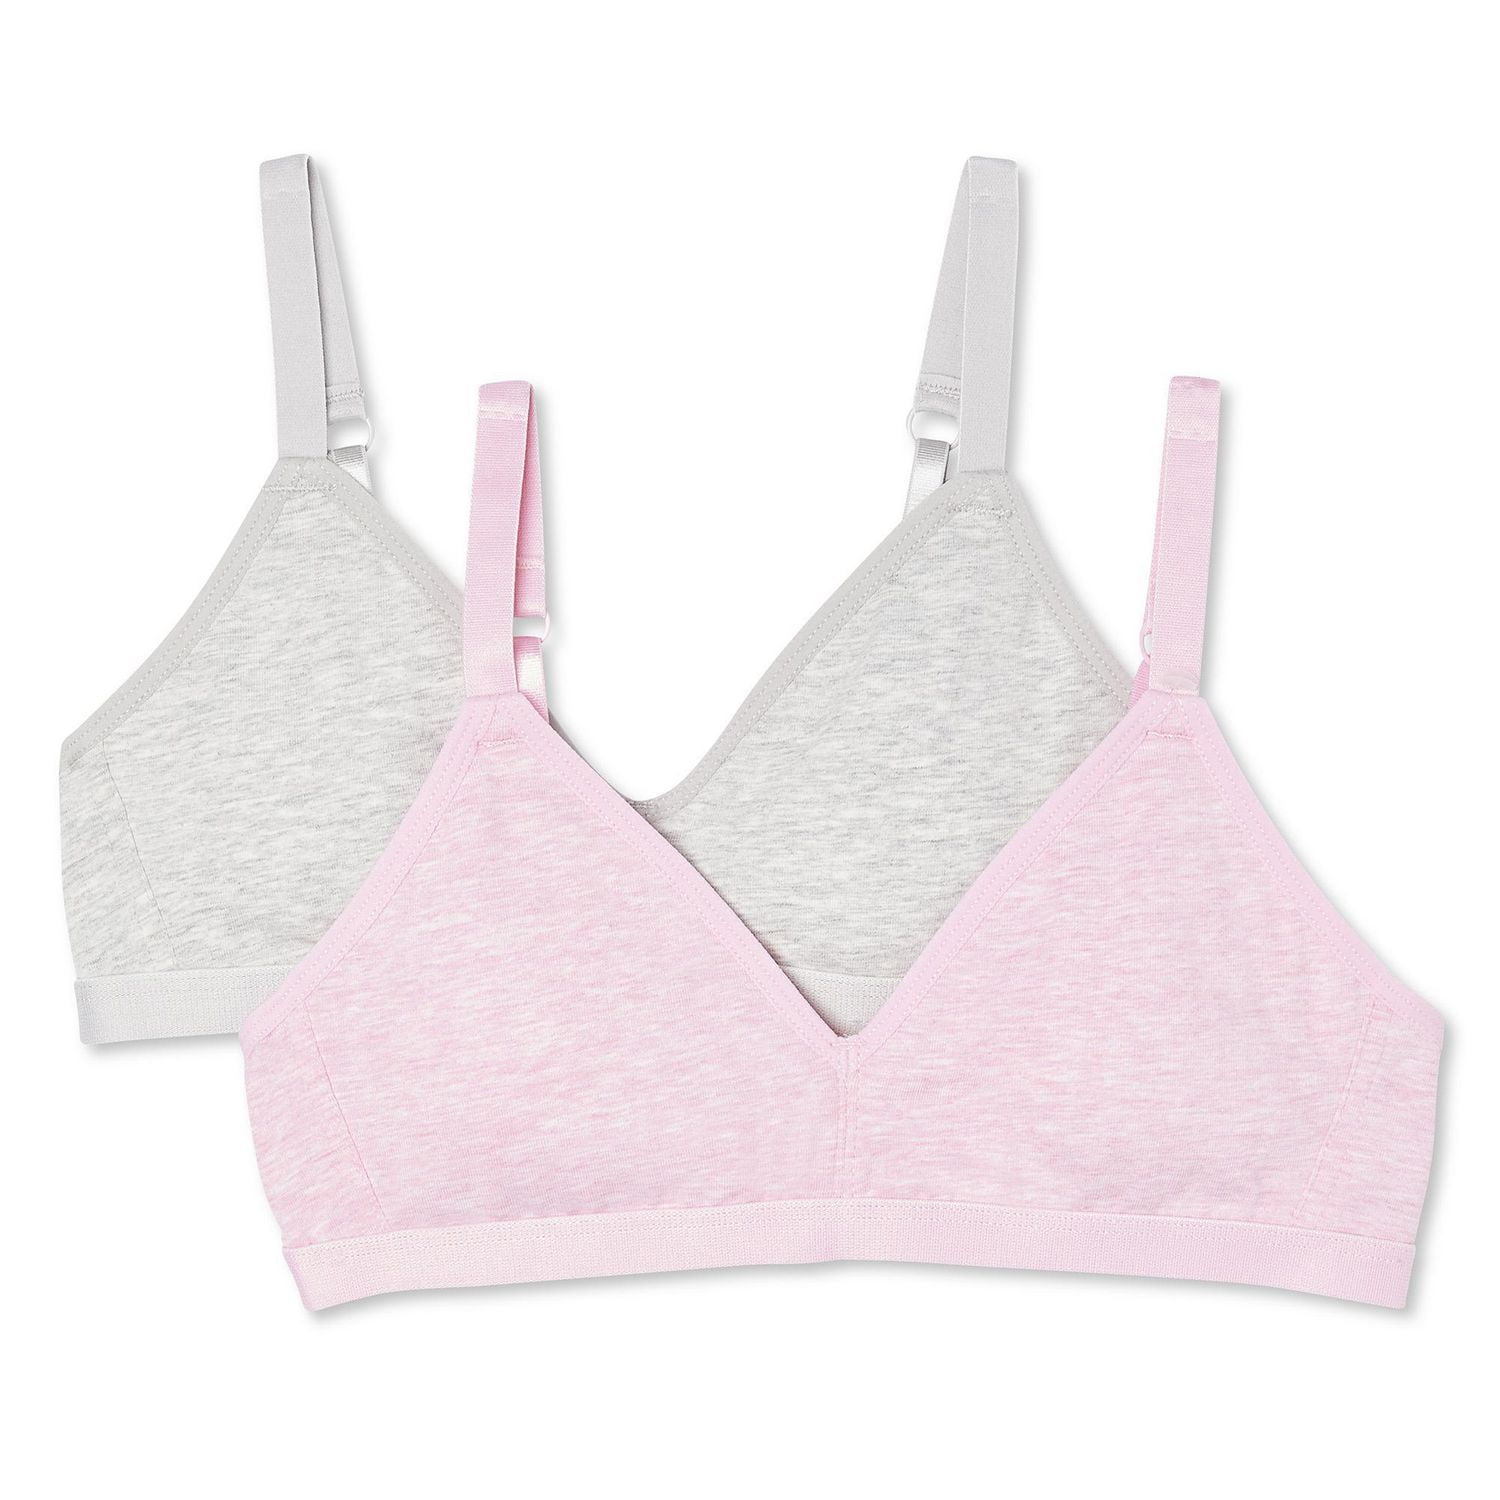 Natural Older Women Over 60! Discover the Best Sports Bras for